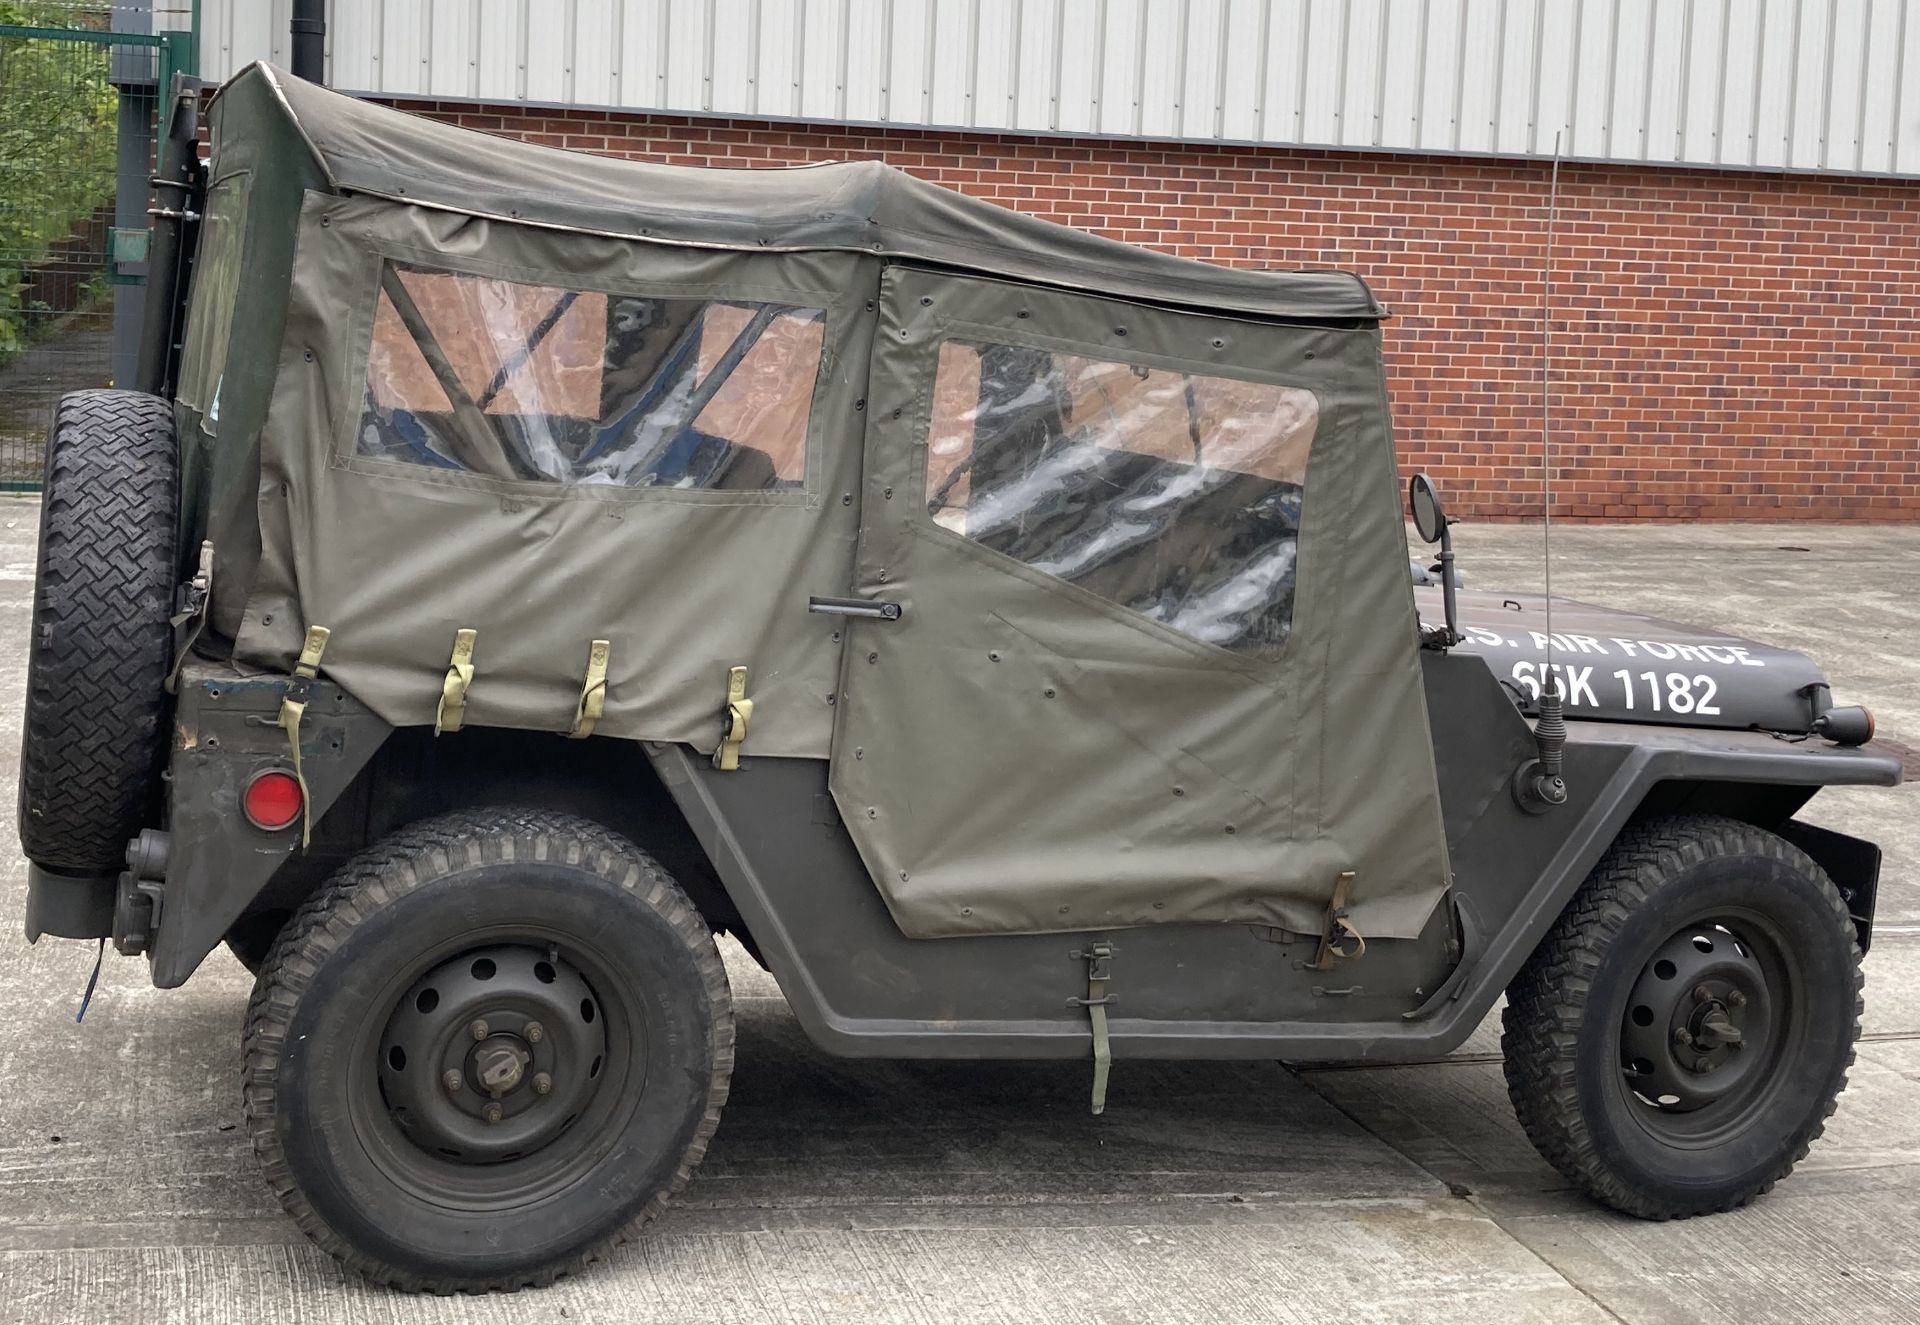 A FORD M151 (WILLYS) 1/4 TON 2.2 LIGHT 4X4 UTILITY JEEP - Petrol - Green - Ex USA Air Force. - Image 6 of 28